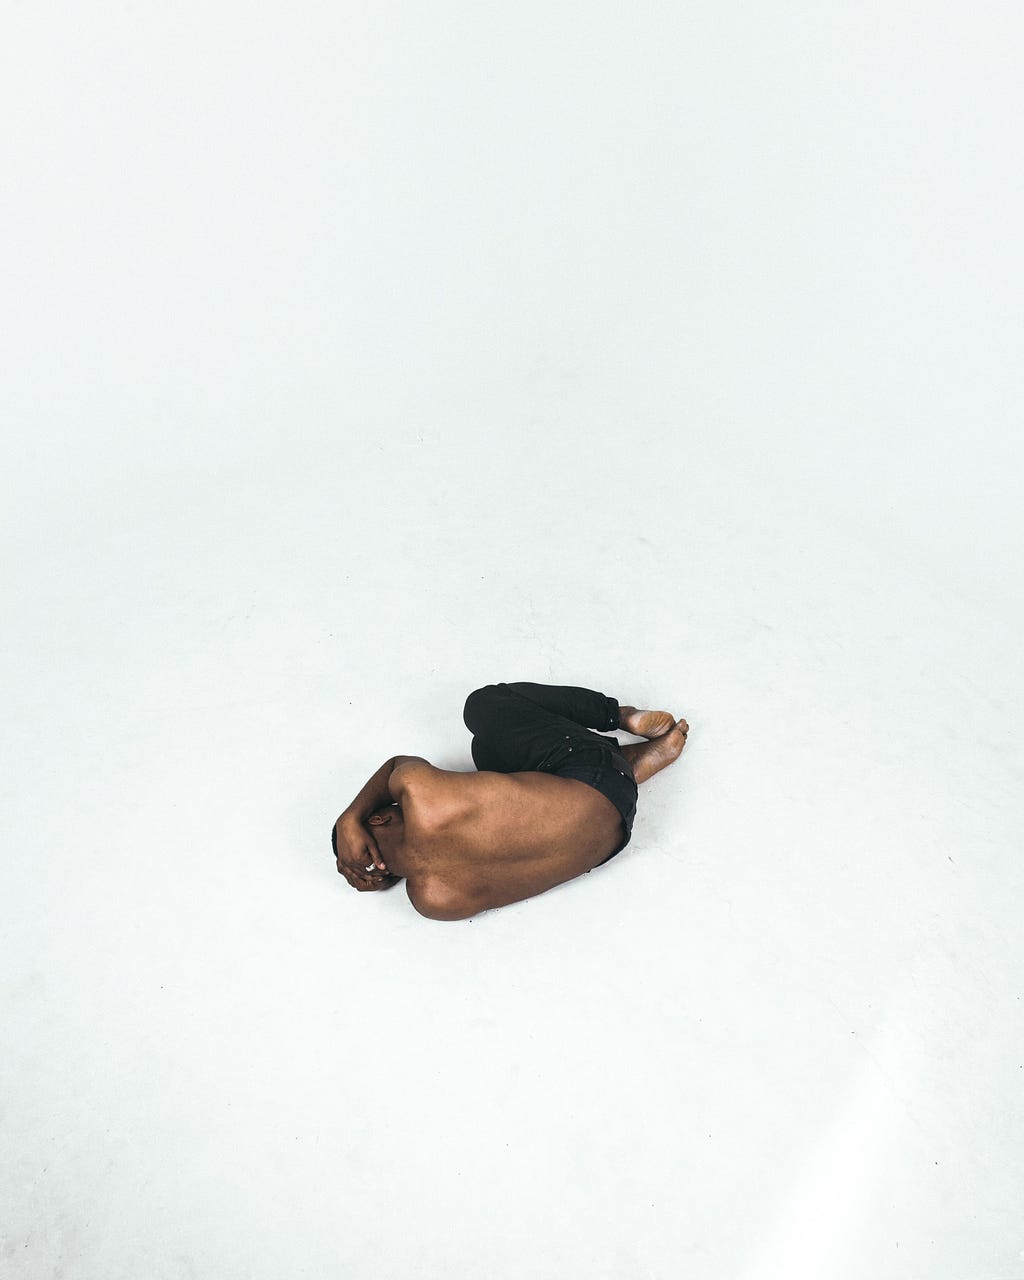 Man curled up in a ball on a white surface. Suggesting pain.